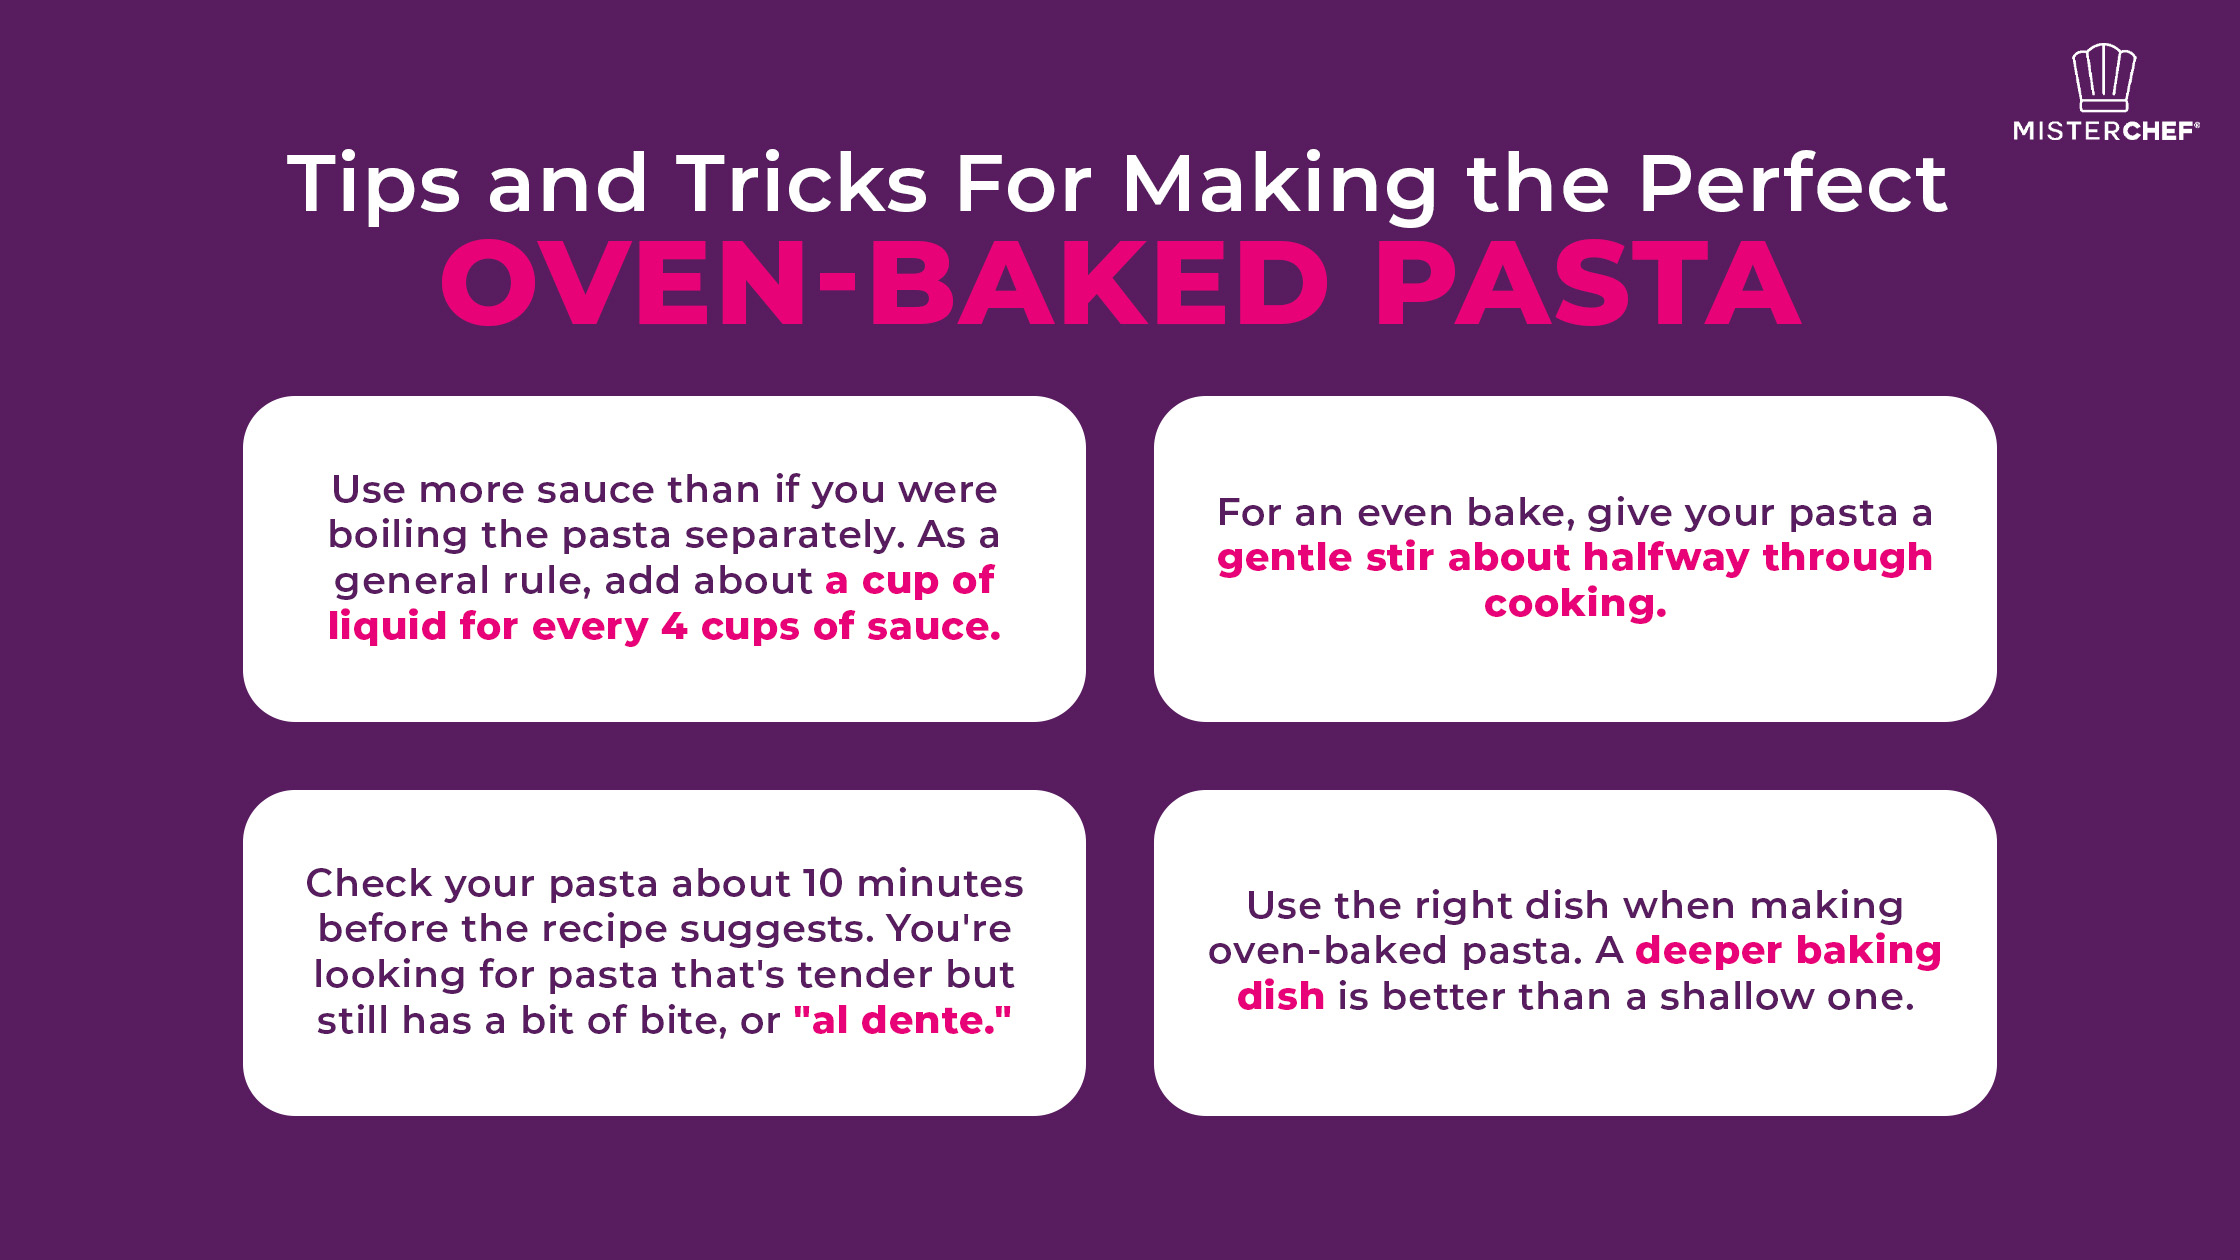 Tips for perfect oven baked pasta